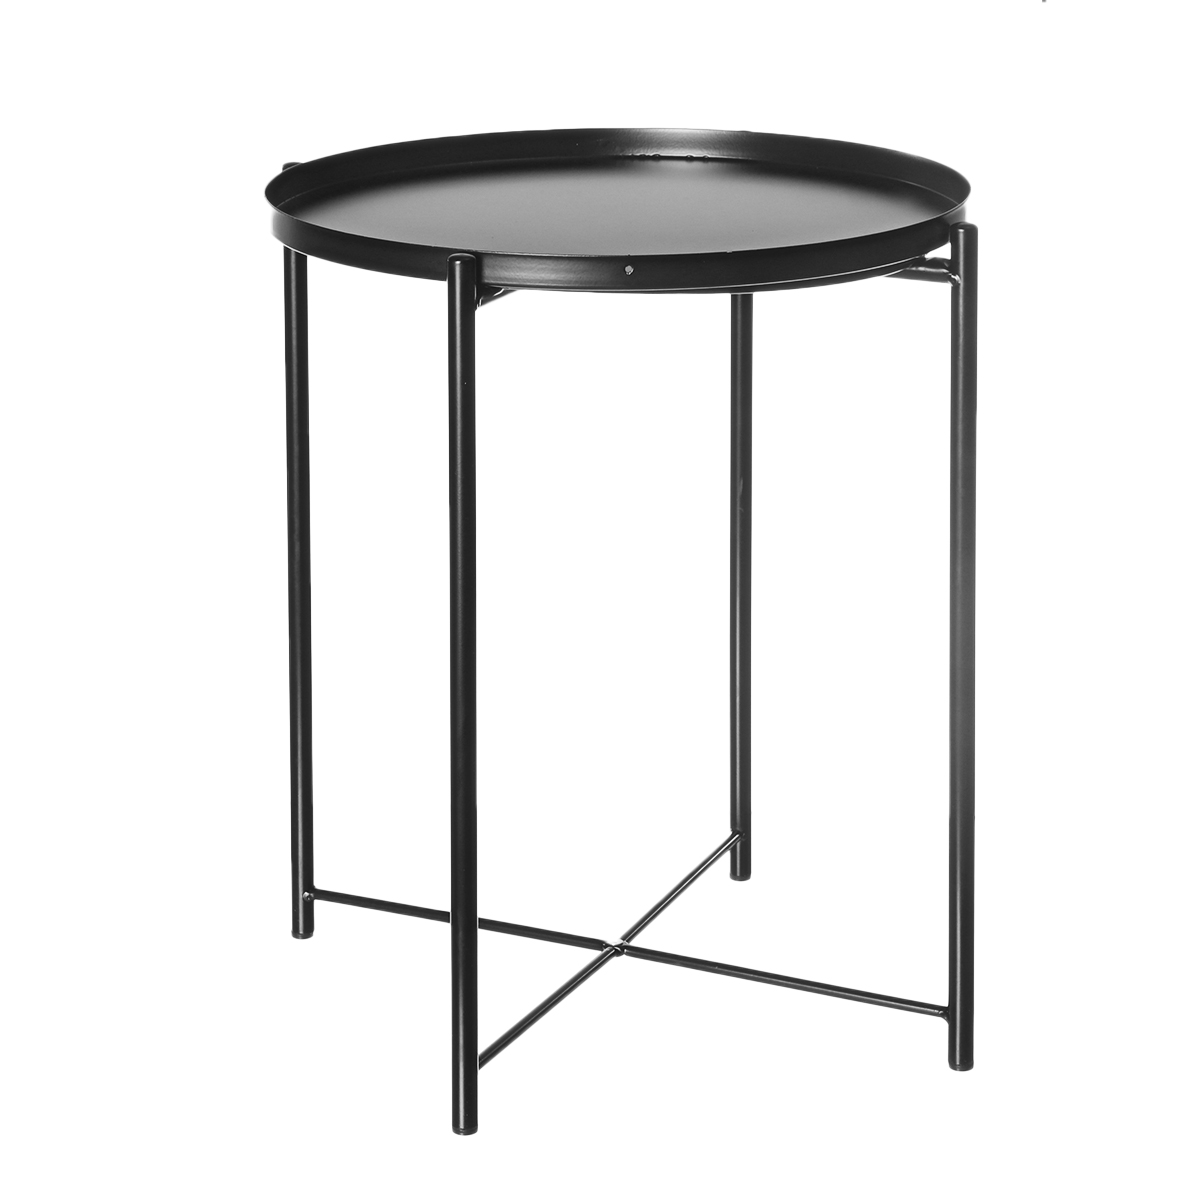 4452cm-Round-Side-End-Coffee-Table-Steel-Tray-Metal-Side-Desk-Furniture-for-Home-Bedside-Storage-Sup-1767827-7